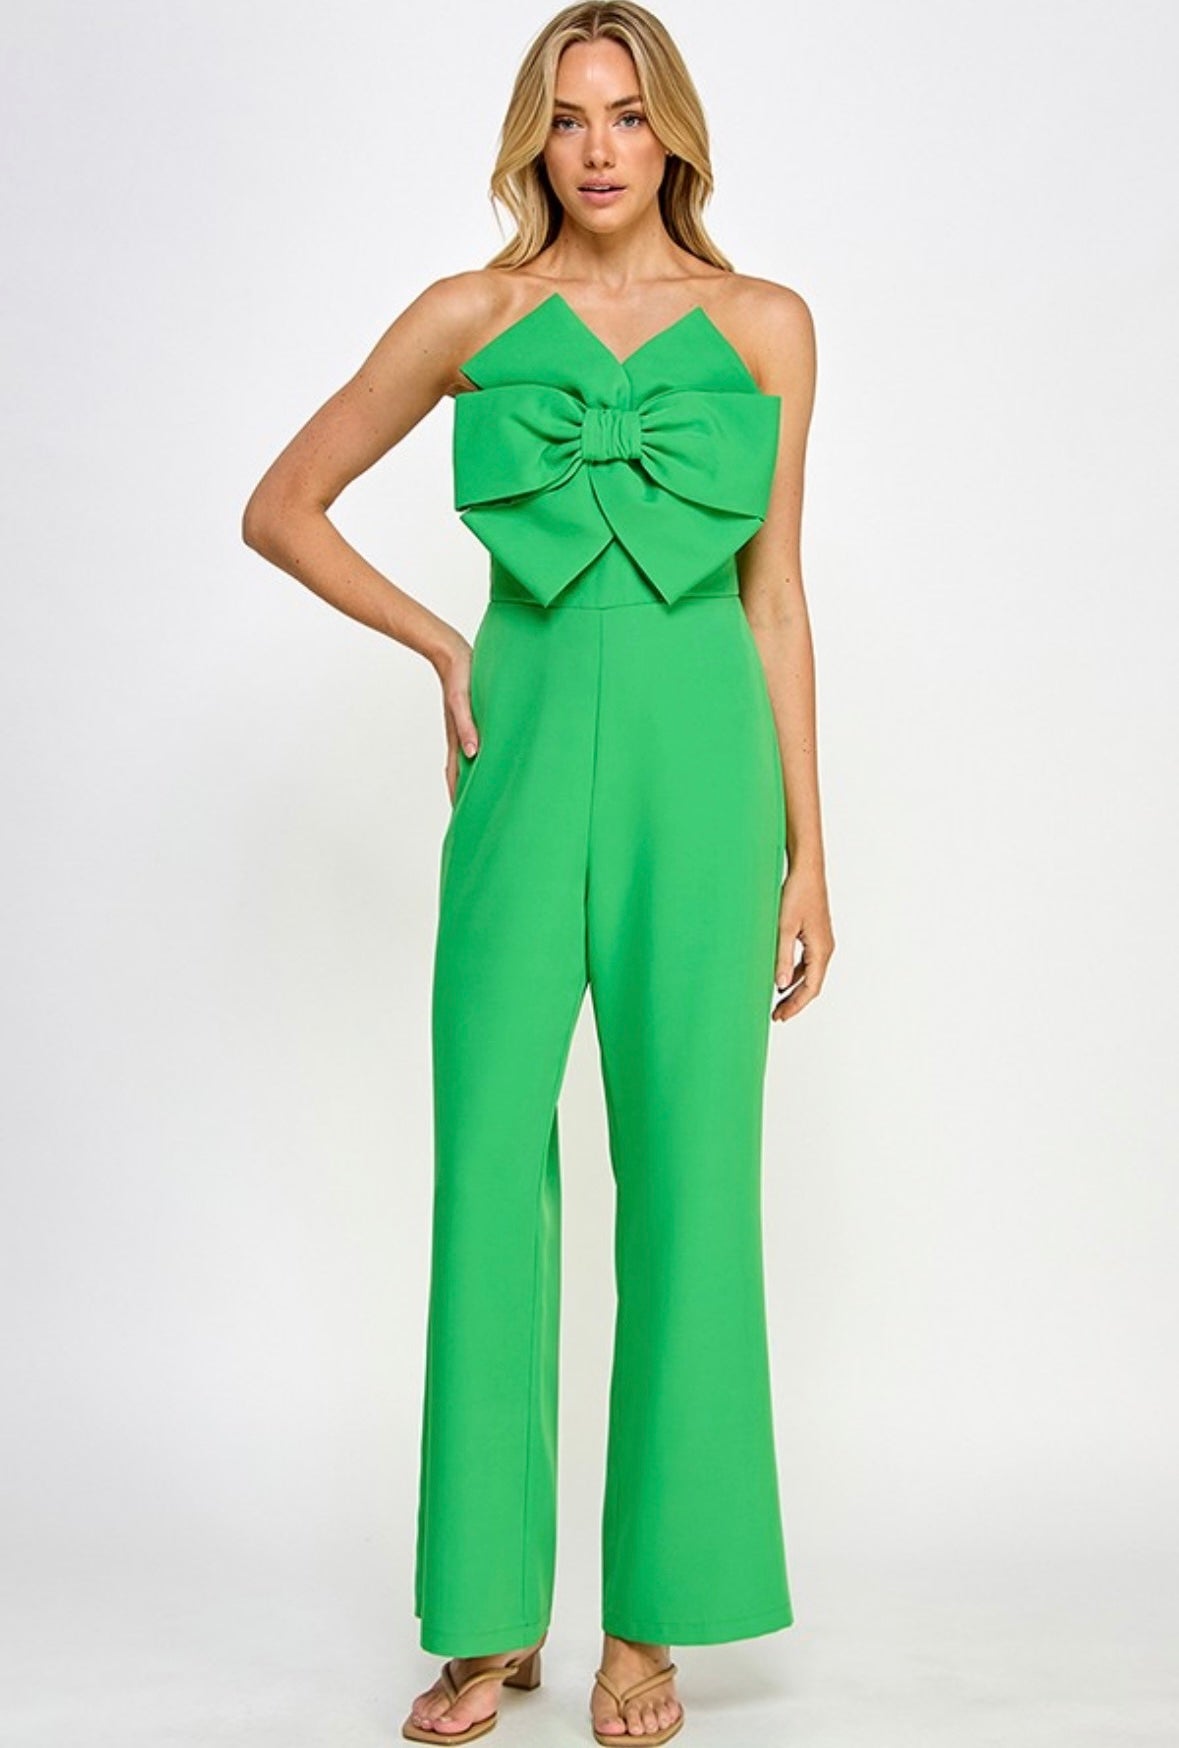 All Eyes On You Jumpsuit